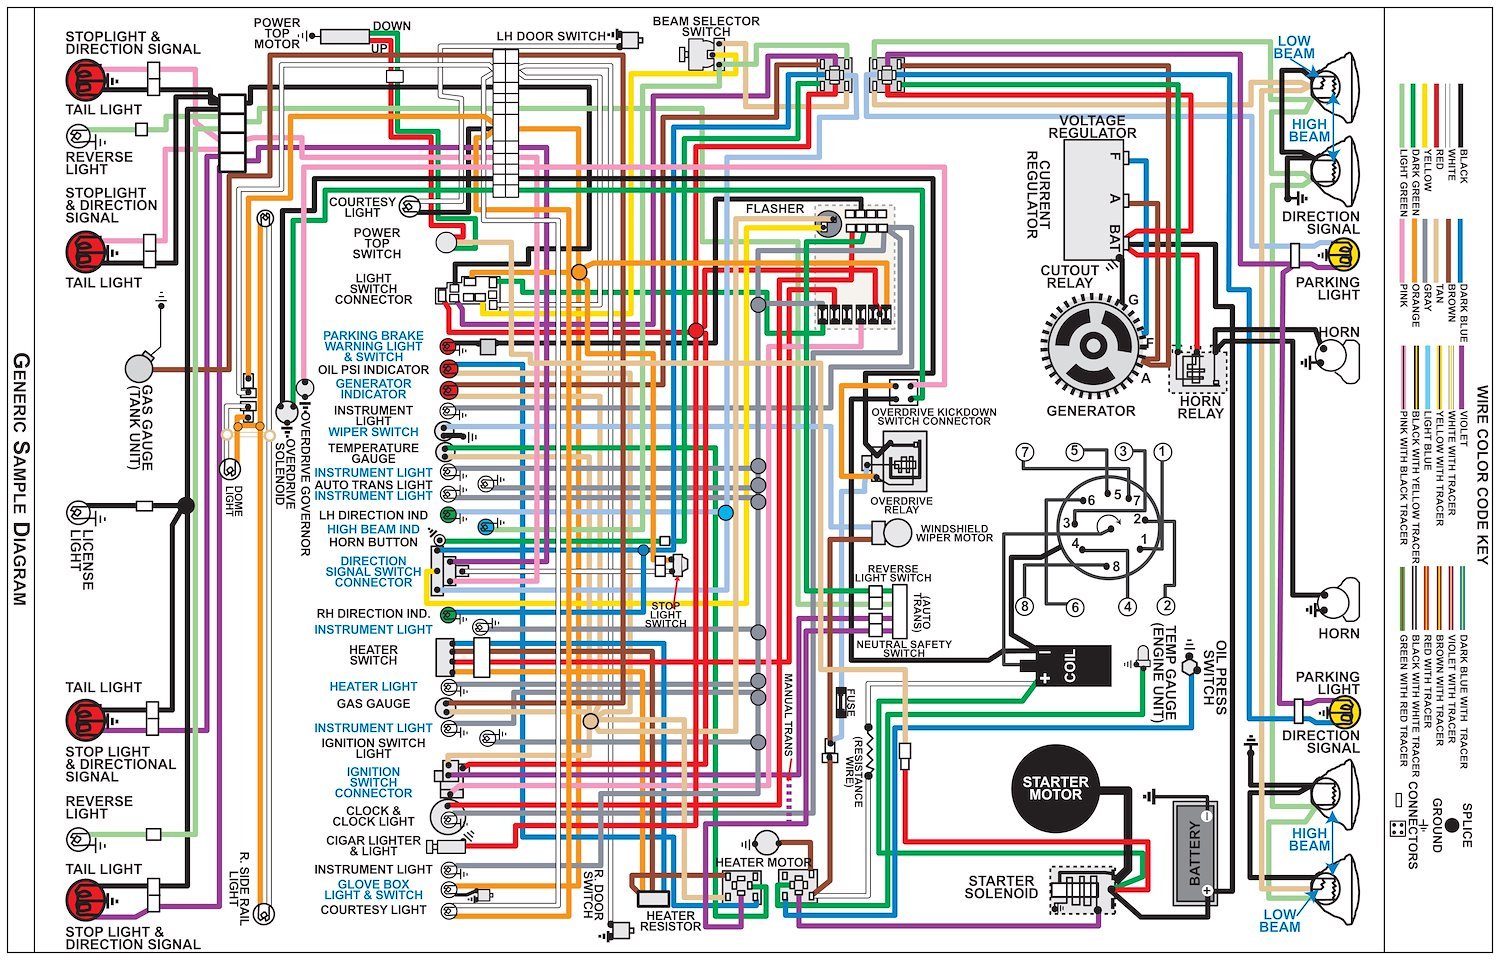 Wiring Diagram for 1957 Ford Car, 11 in x 17 in., Laminated